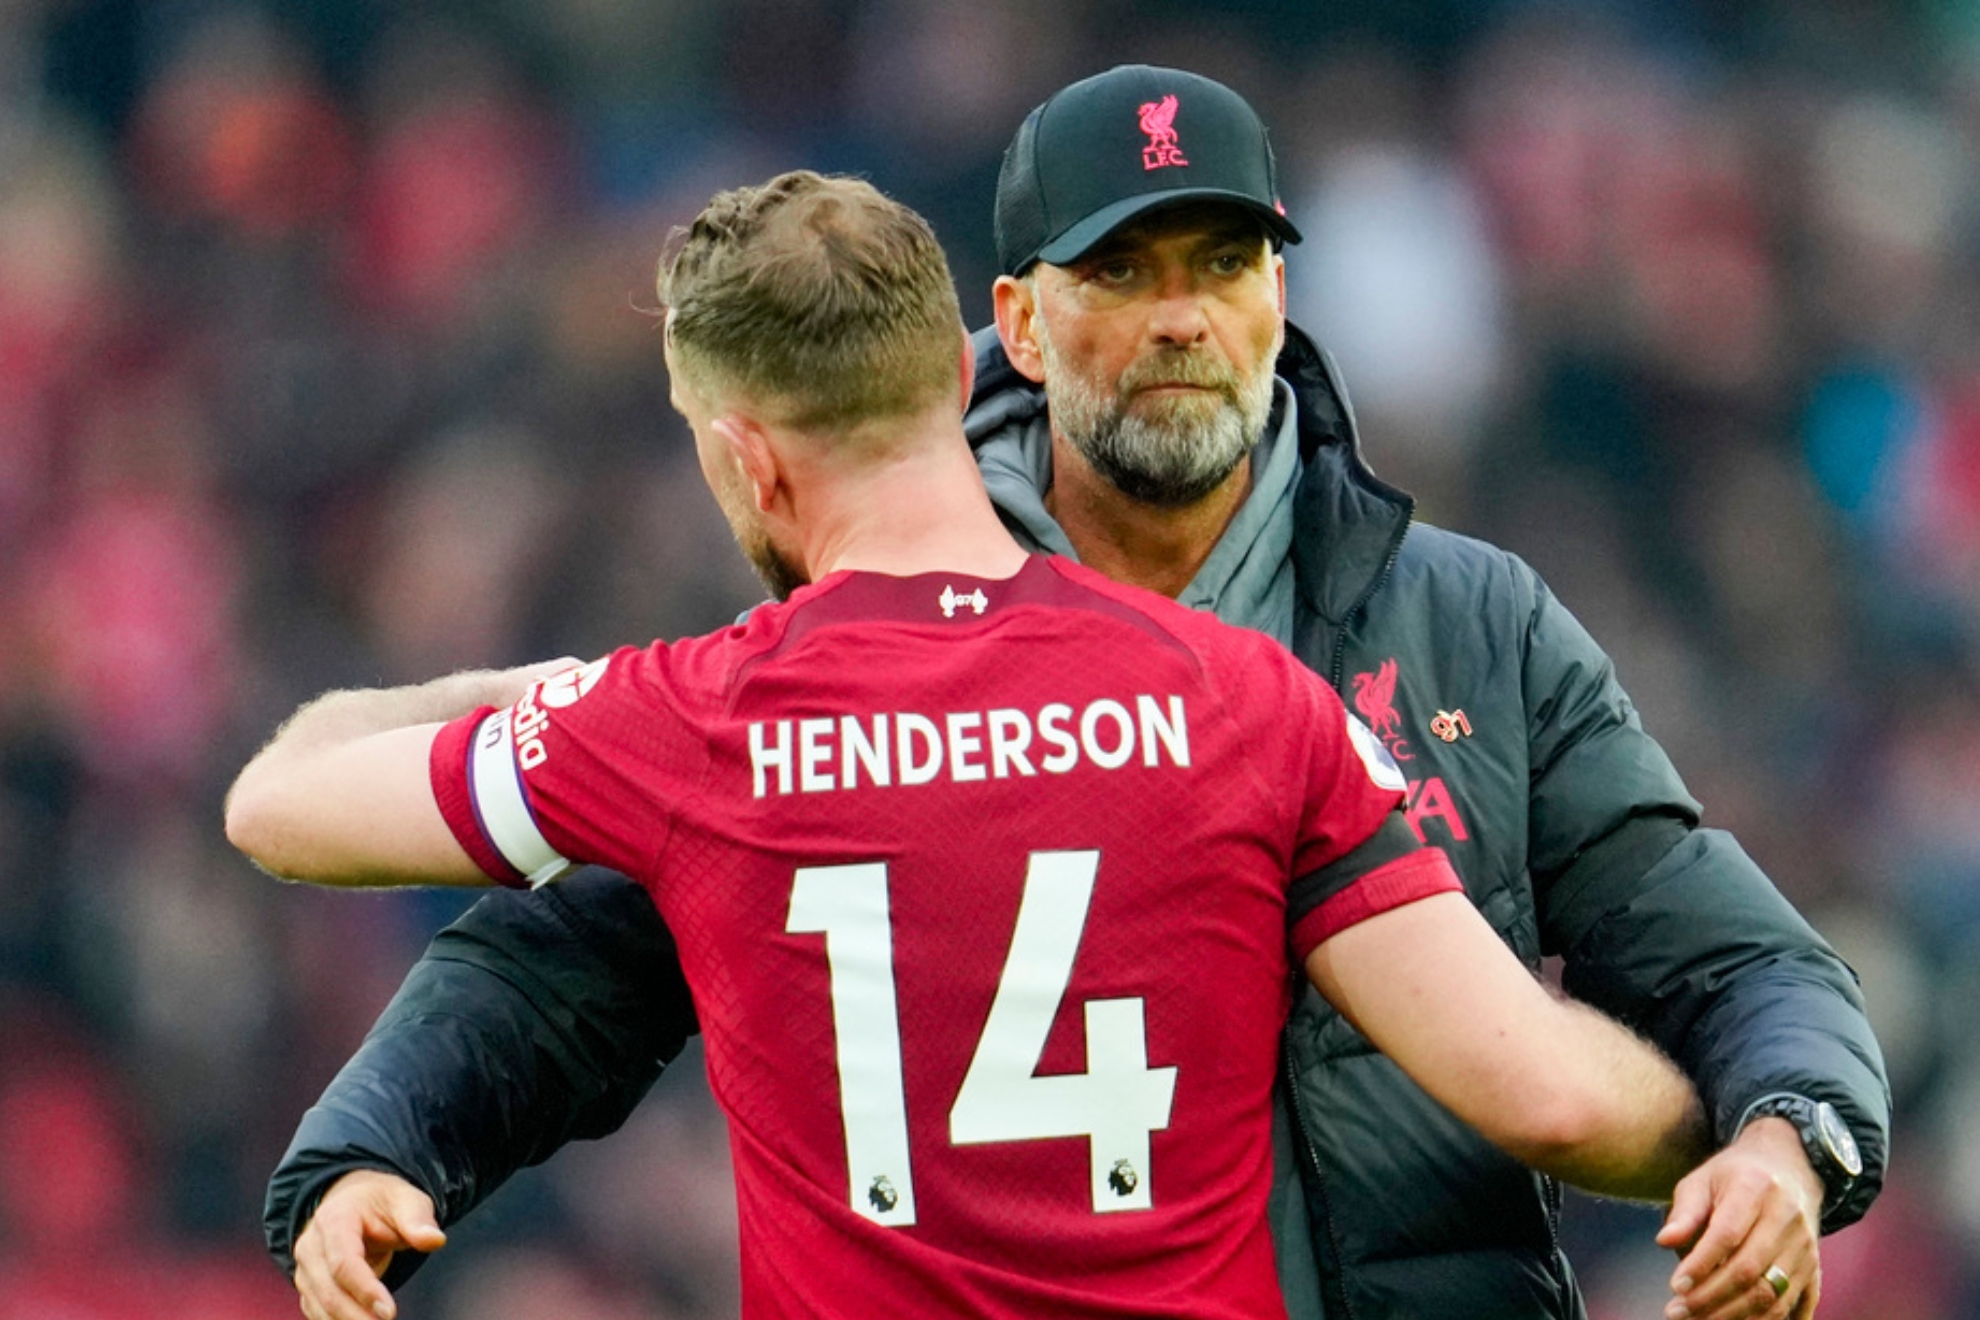 The meeting between Liverpool manager Jurgen Klopp and Jordan Henderson was to the T, to say the least.